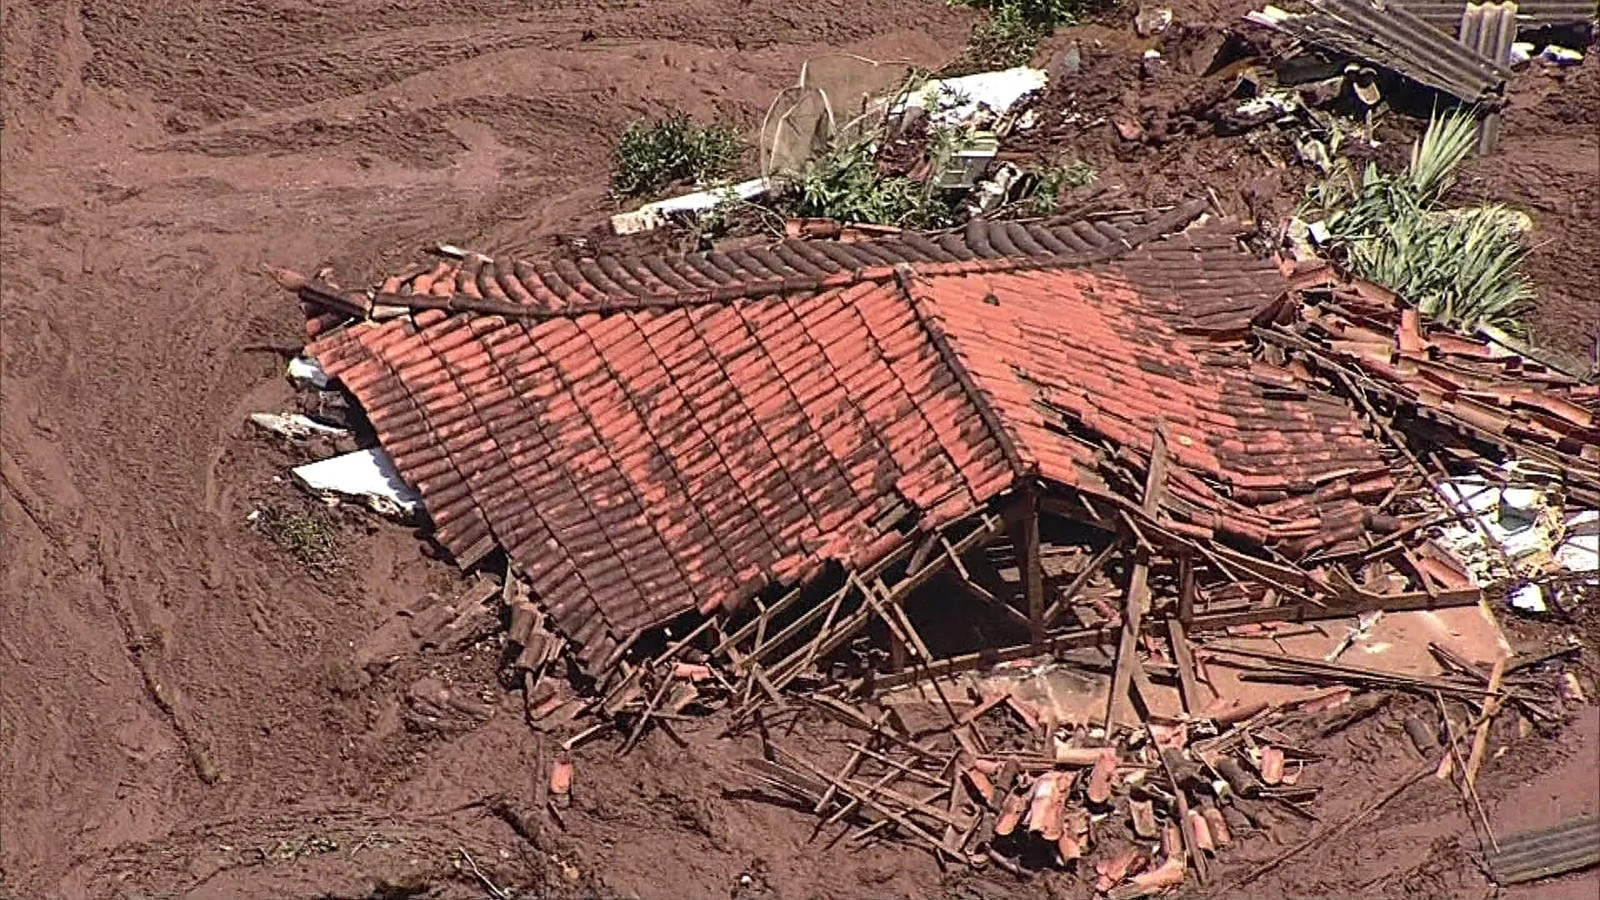 Vale says alarms didn’t go off on time in Brumadinho due to 'speed' of sludge